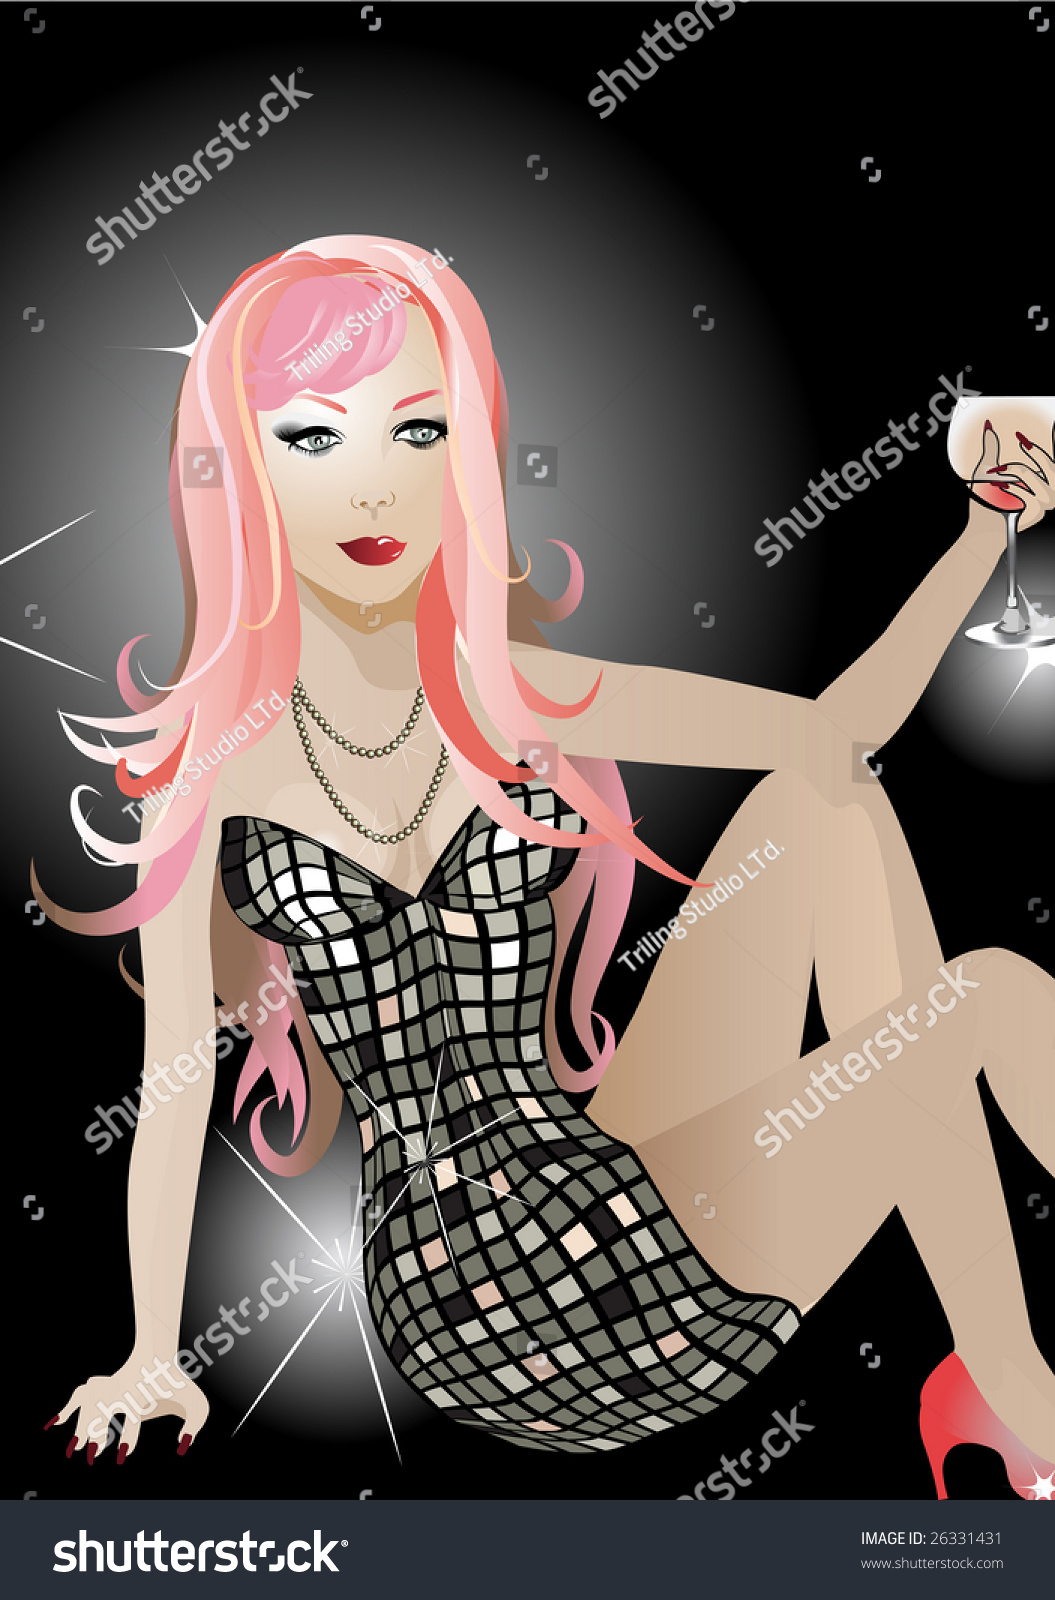 Download Vector Illustration Sexy Woman Drinking Wine Stock Vector ...